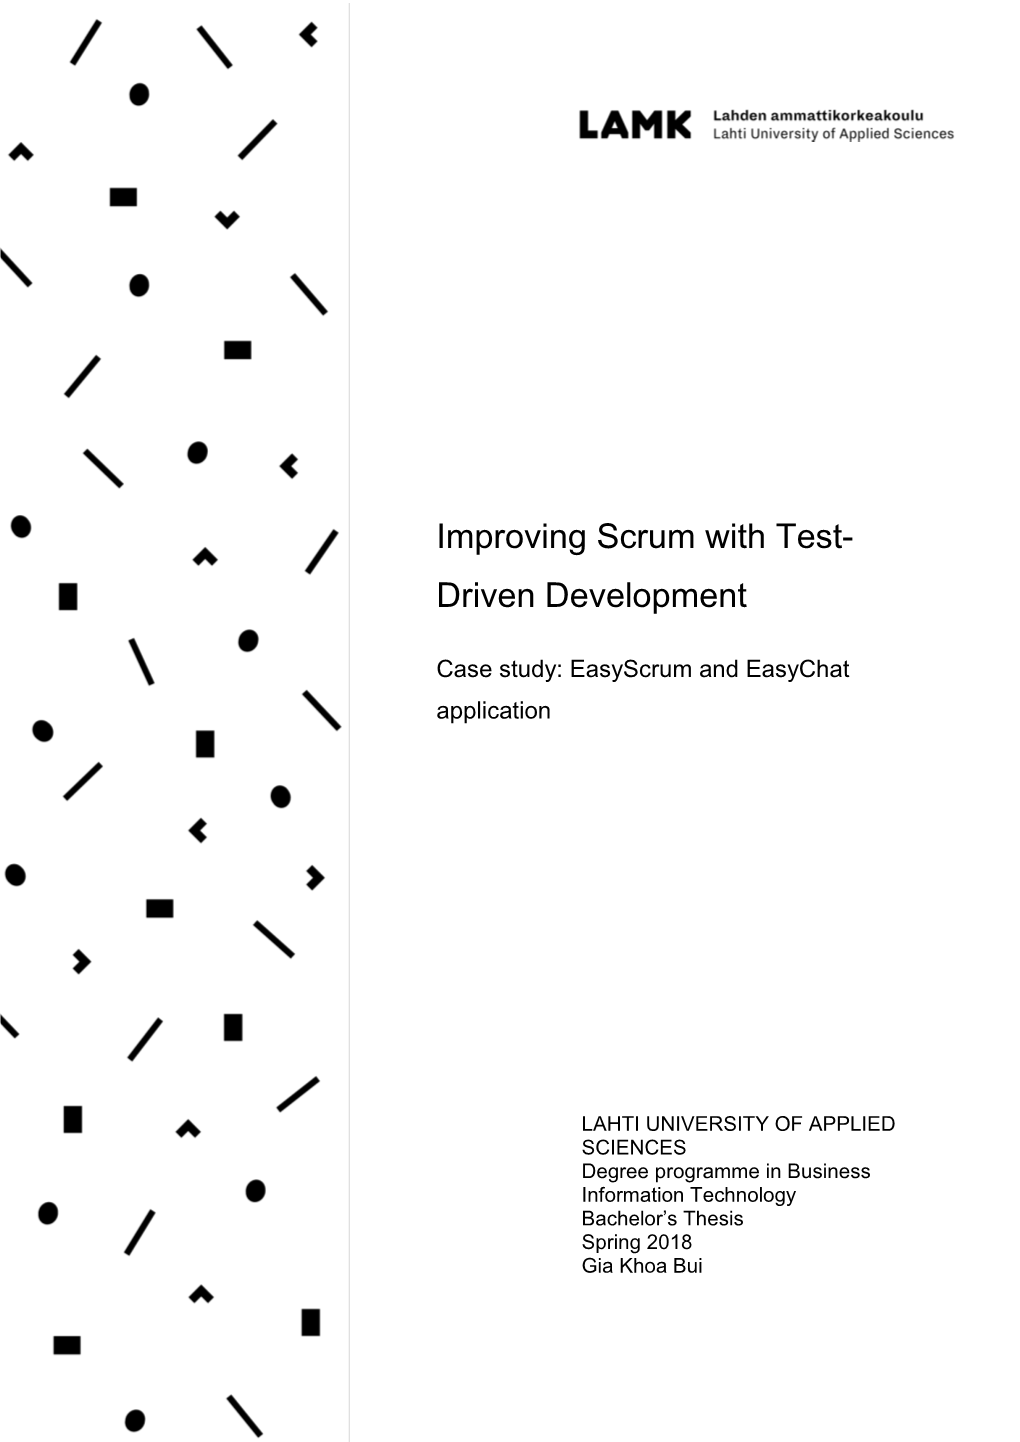 Improving Scrum with Test-Driven Development